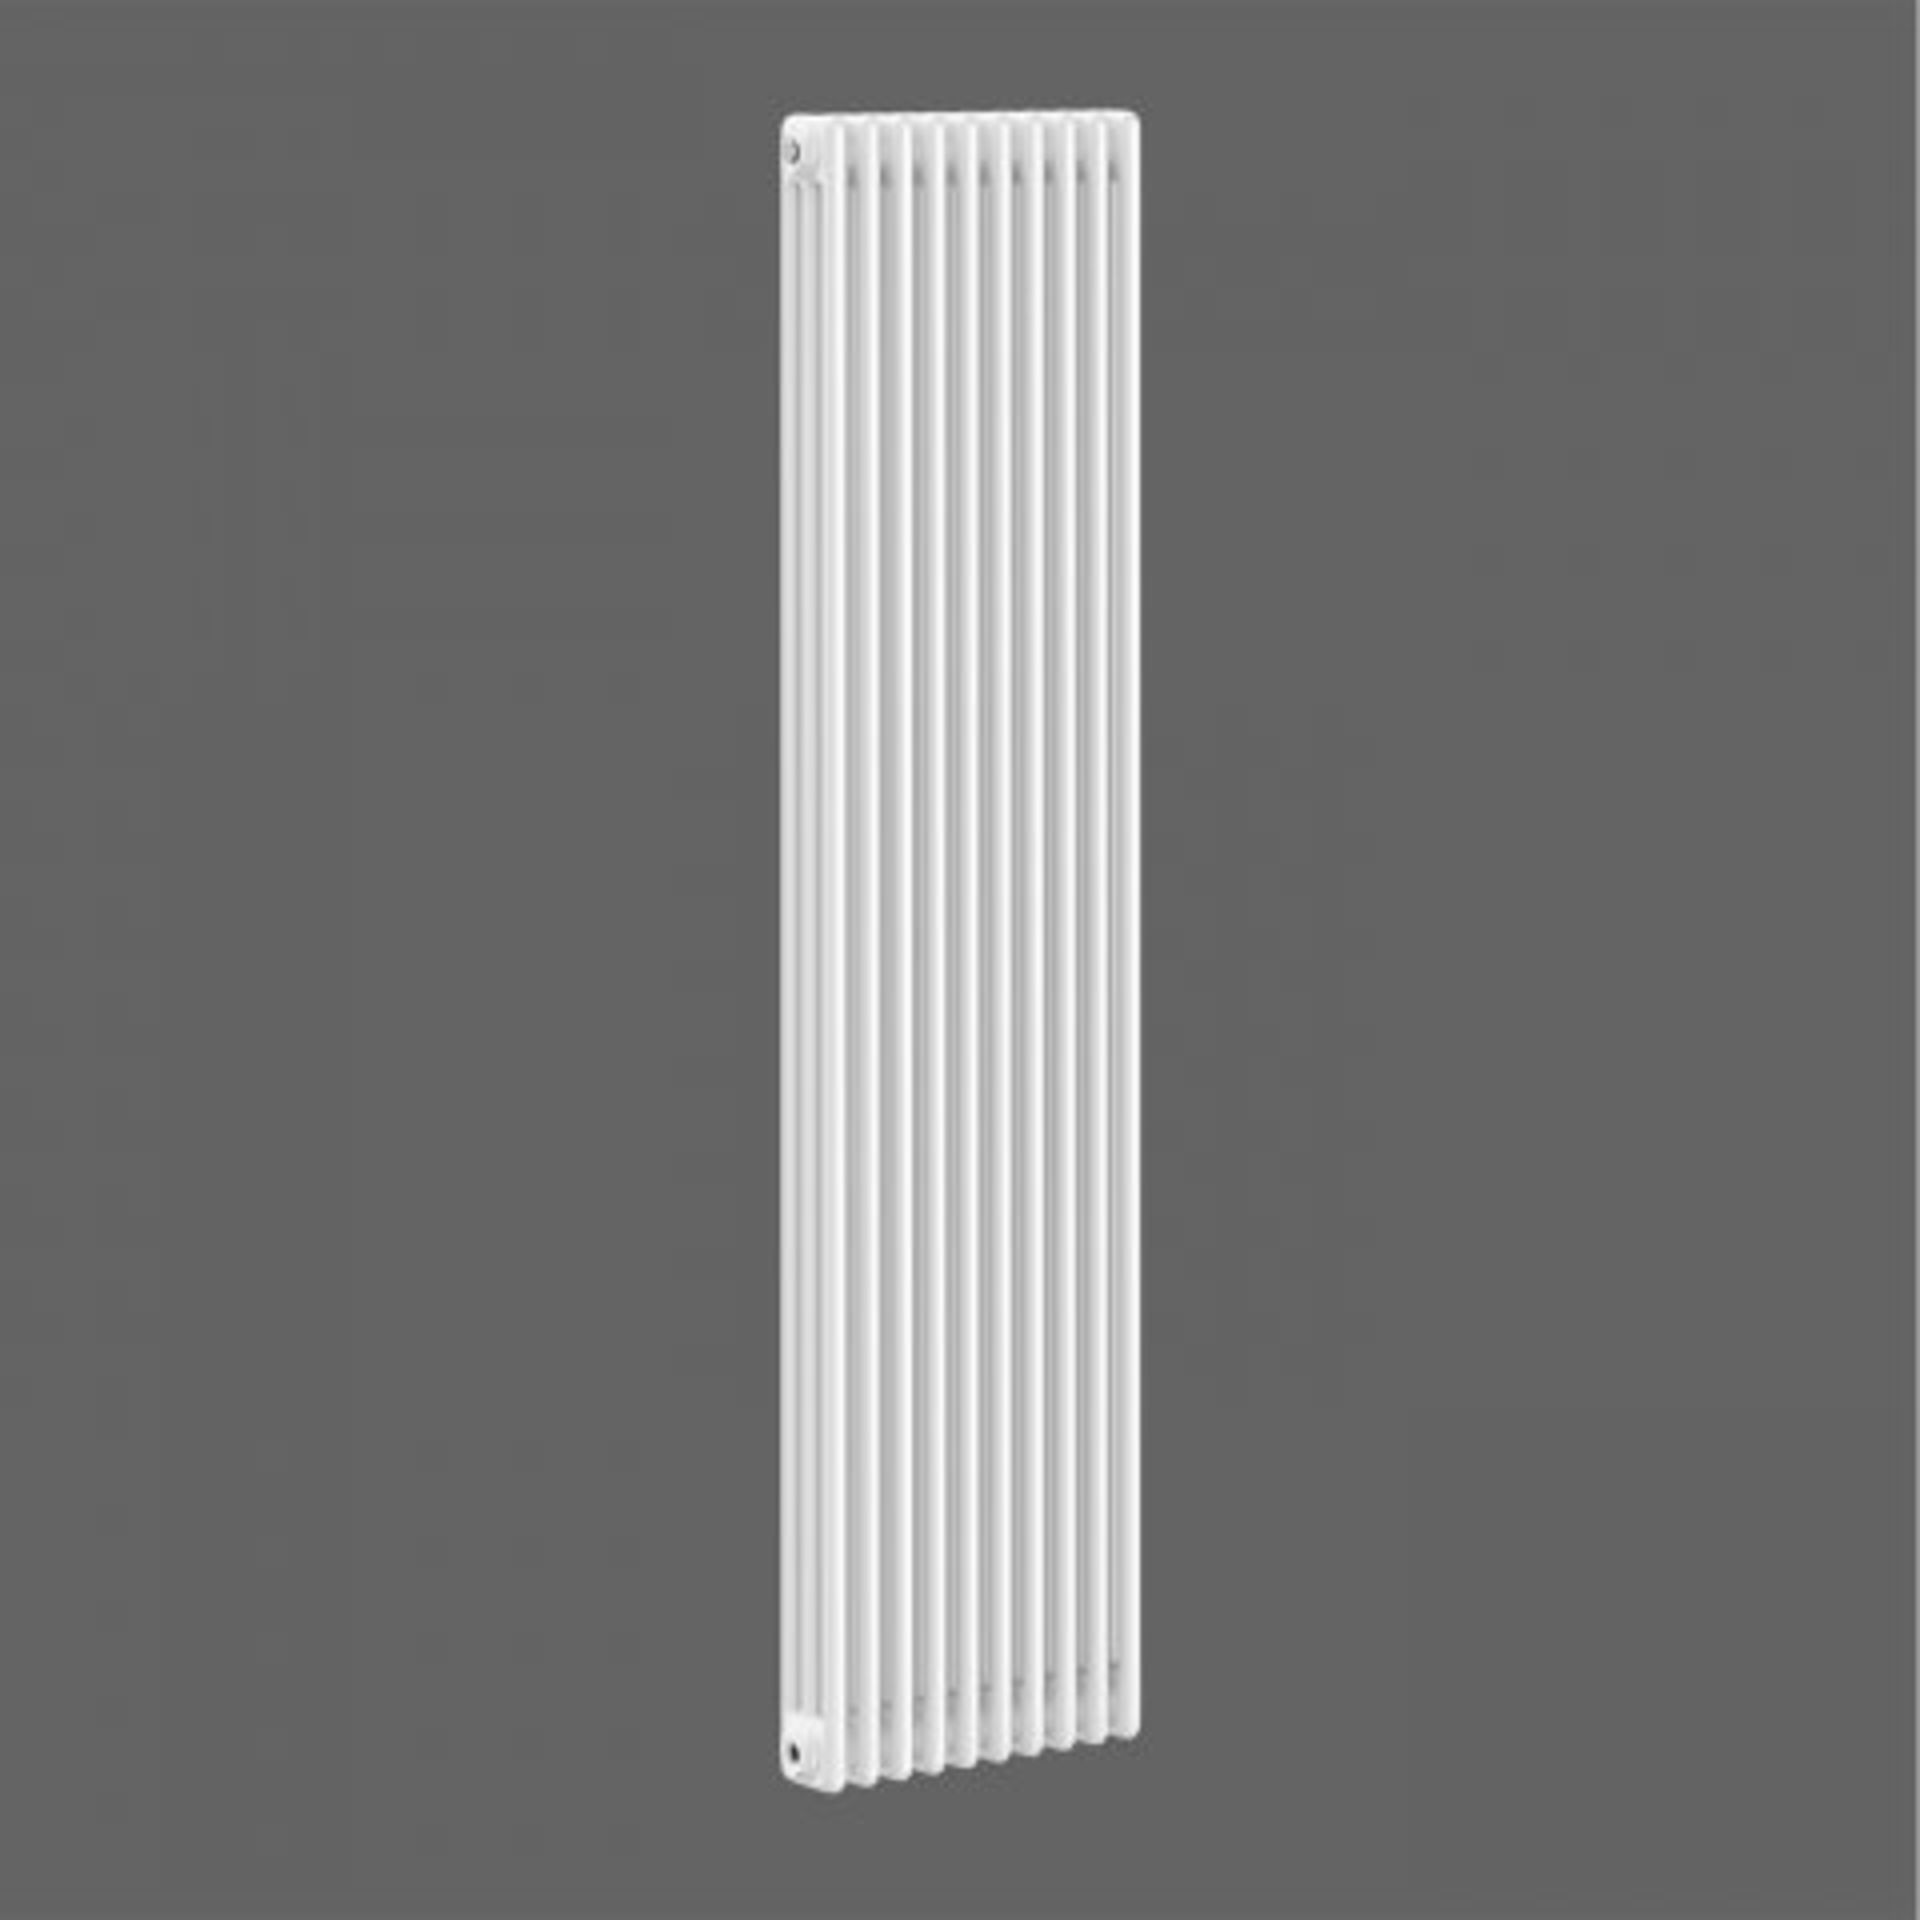 (W129) 1800x468mm White Triple Panel Vertical Colosseum Traditional Radiator. RRP £599.99. Classic - Image 3 of 3